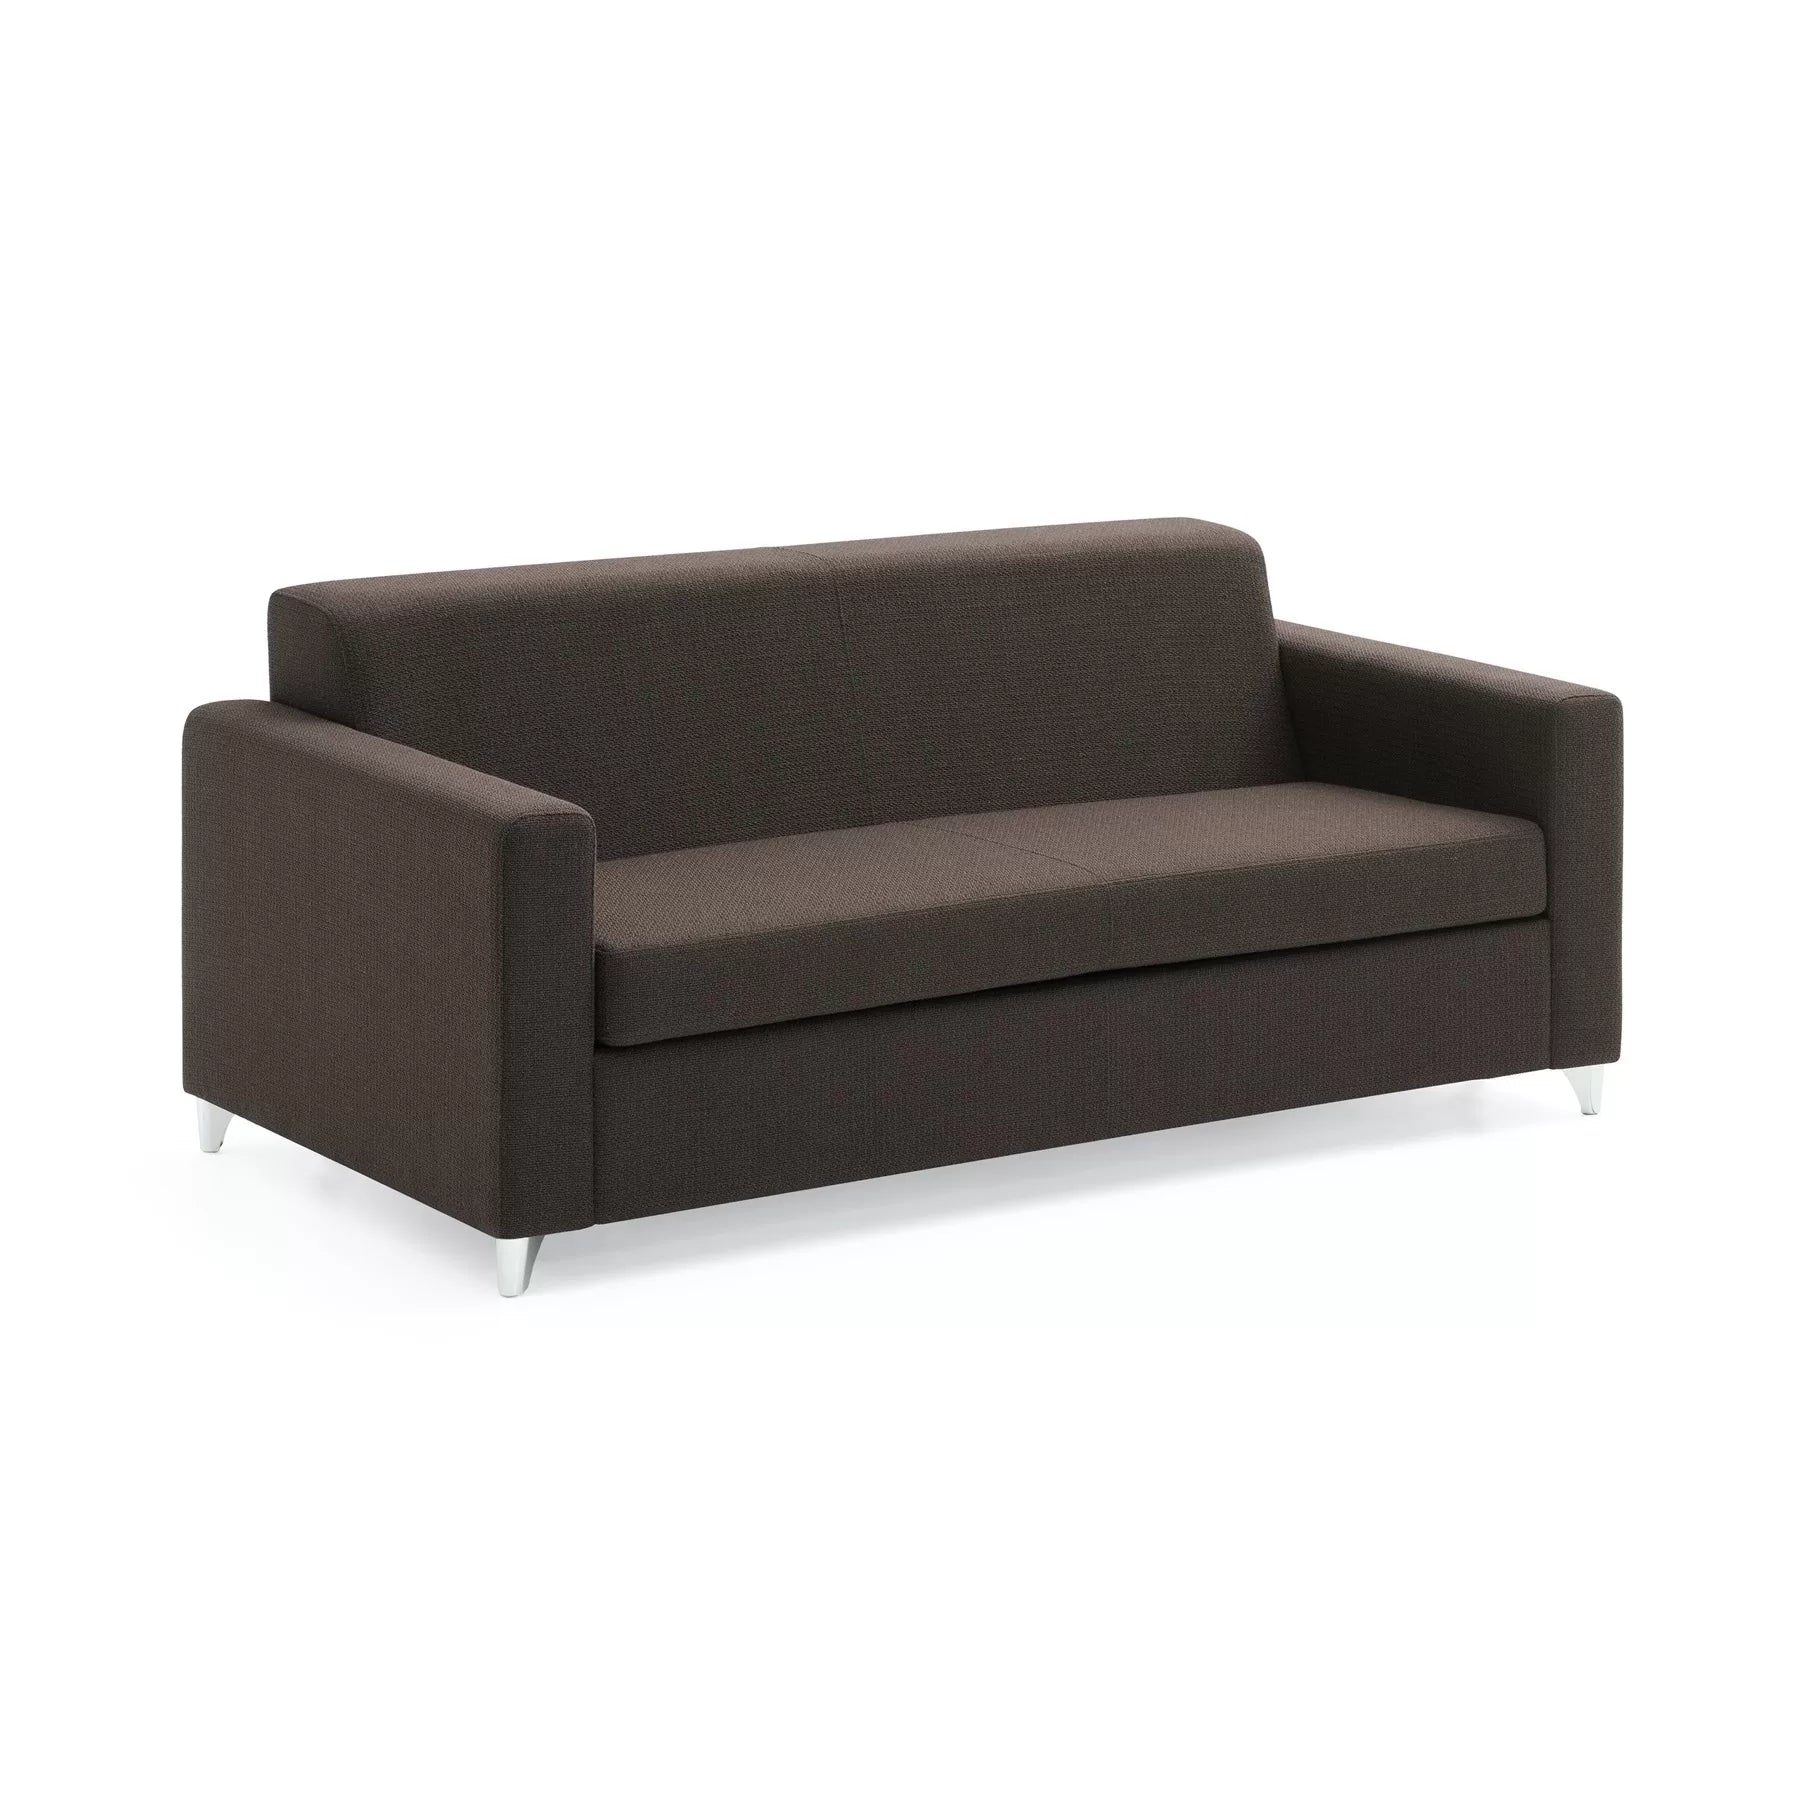 Odin 885 Sofa Bed-TM Leader-Contract Furniture Store